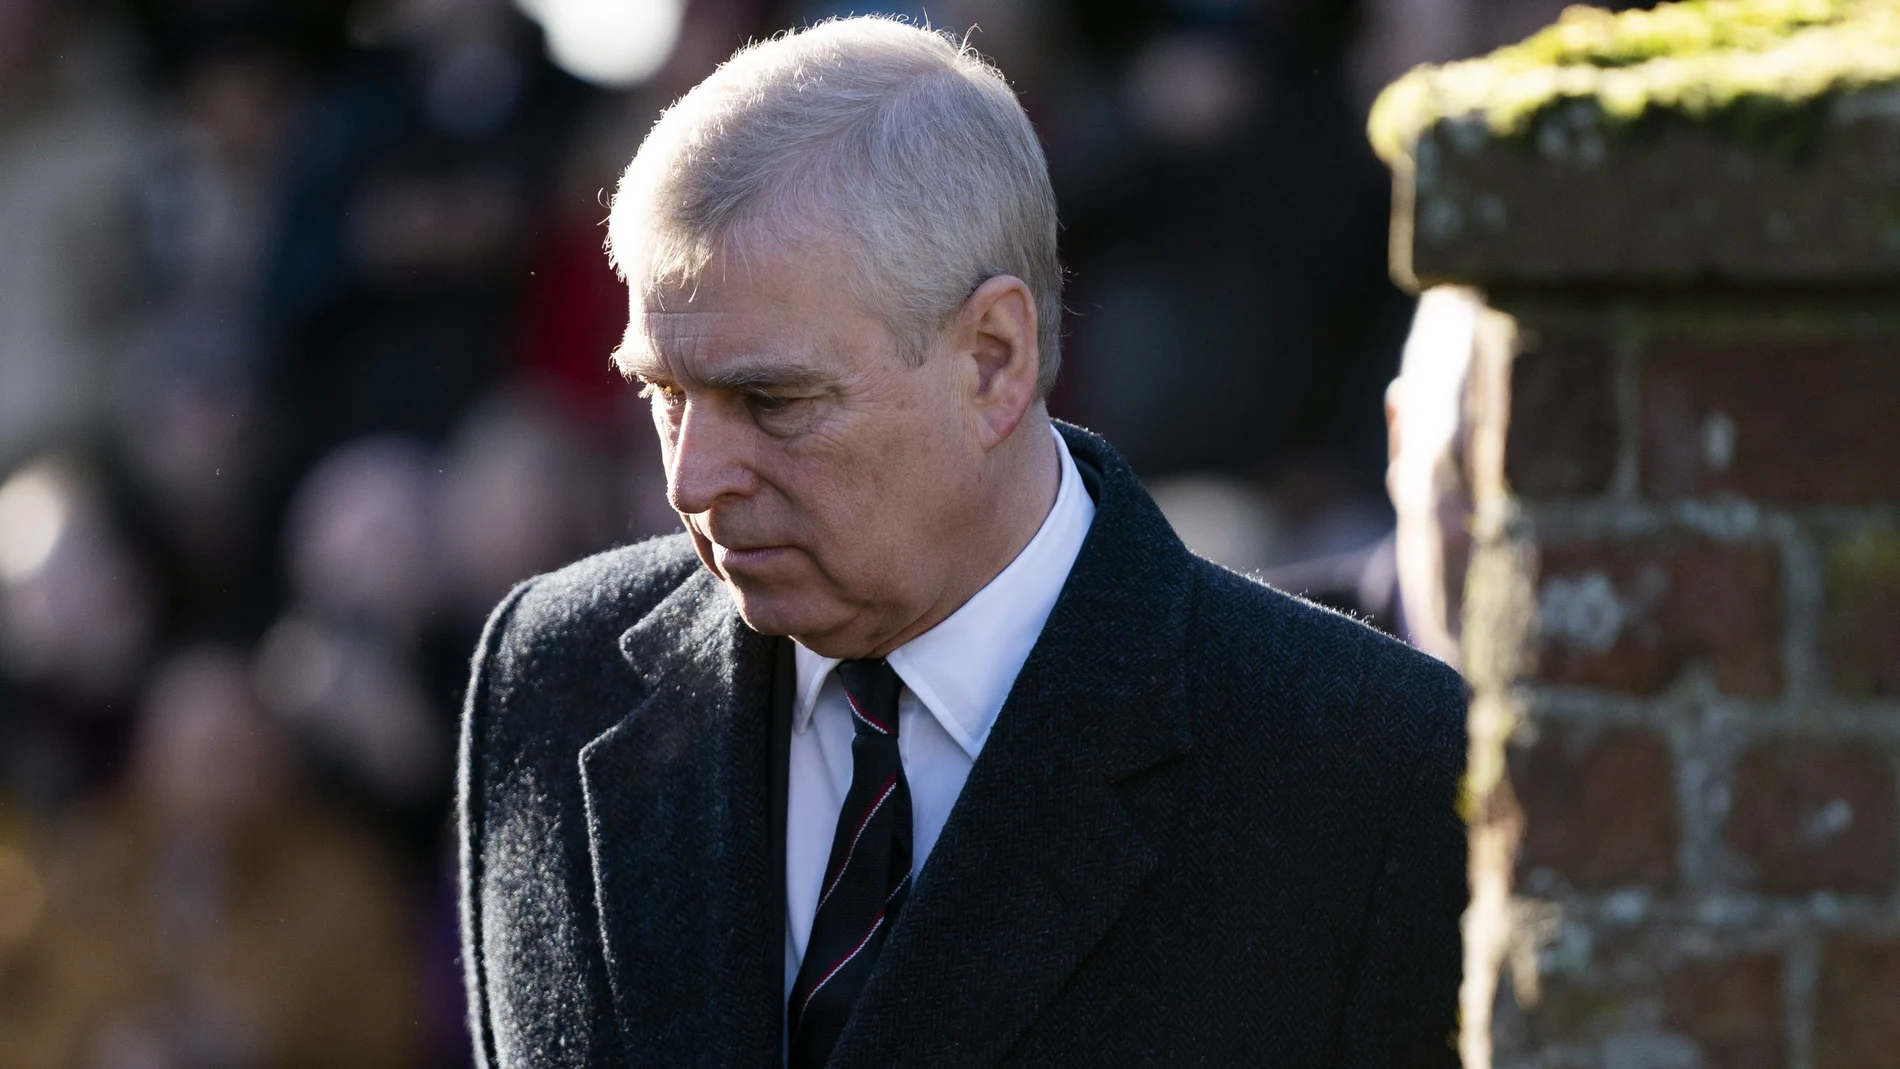 Britain's Prince Andrew, Duke of York arrives for a church service with Queen Elizabeth II (unseen) at St Mary the Virgin in Hillington, Norfolk, Britain.